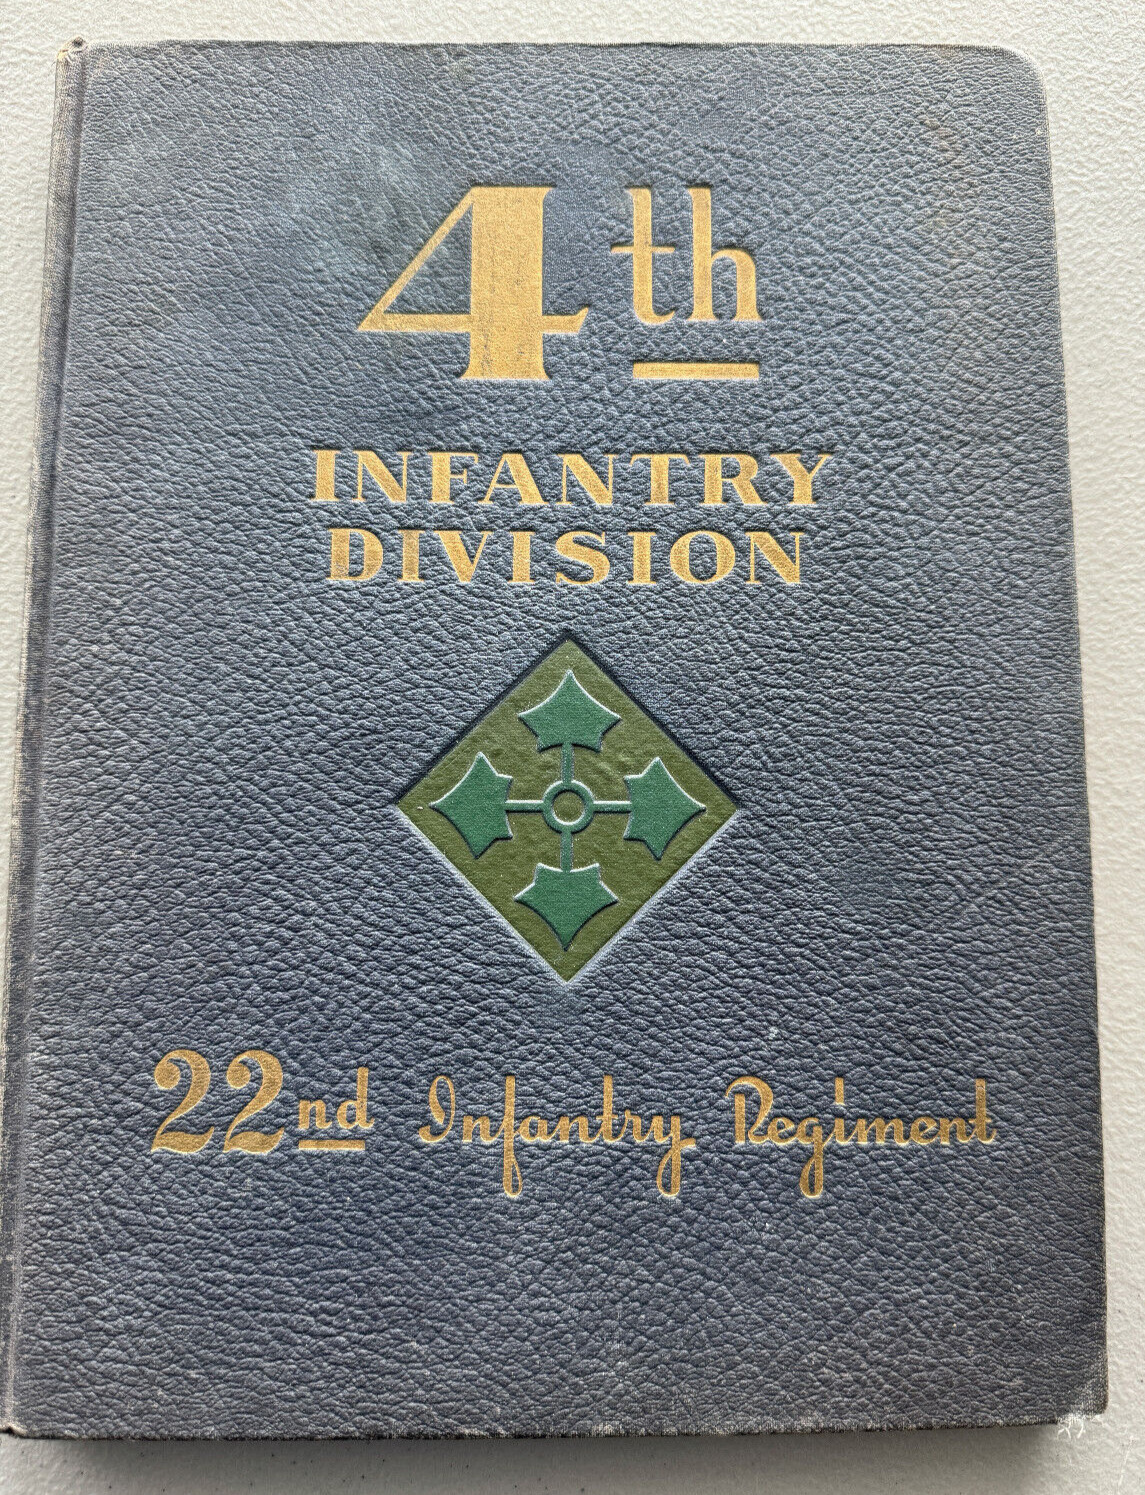 The 22nd Infantry Regiment, 4th Infantry Division, WWII Unit History Book